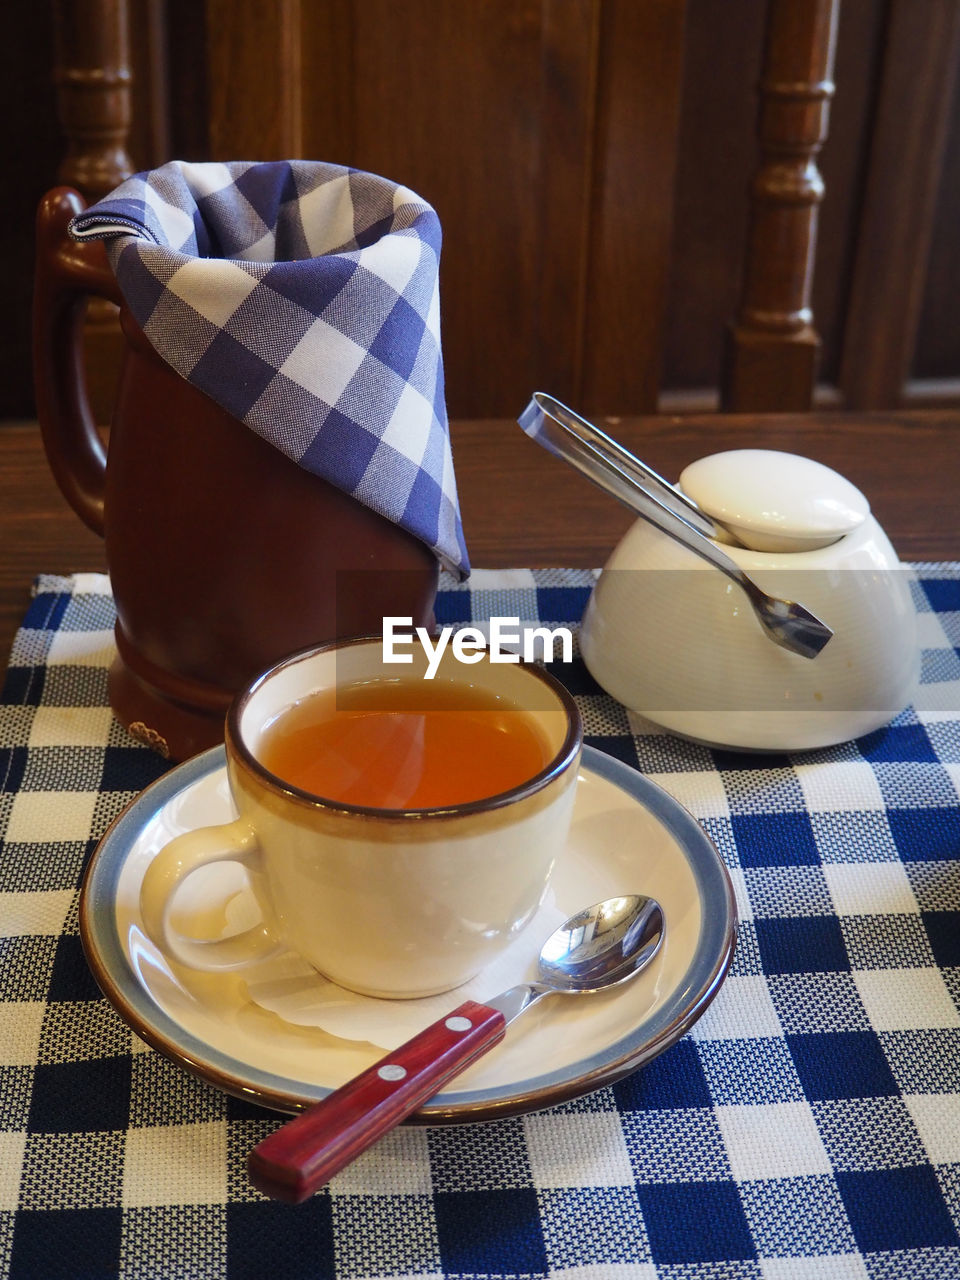 CUP OF TEA ON TABLE AT KITCHEN